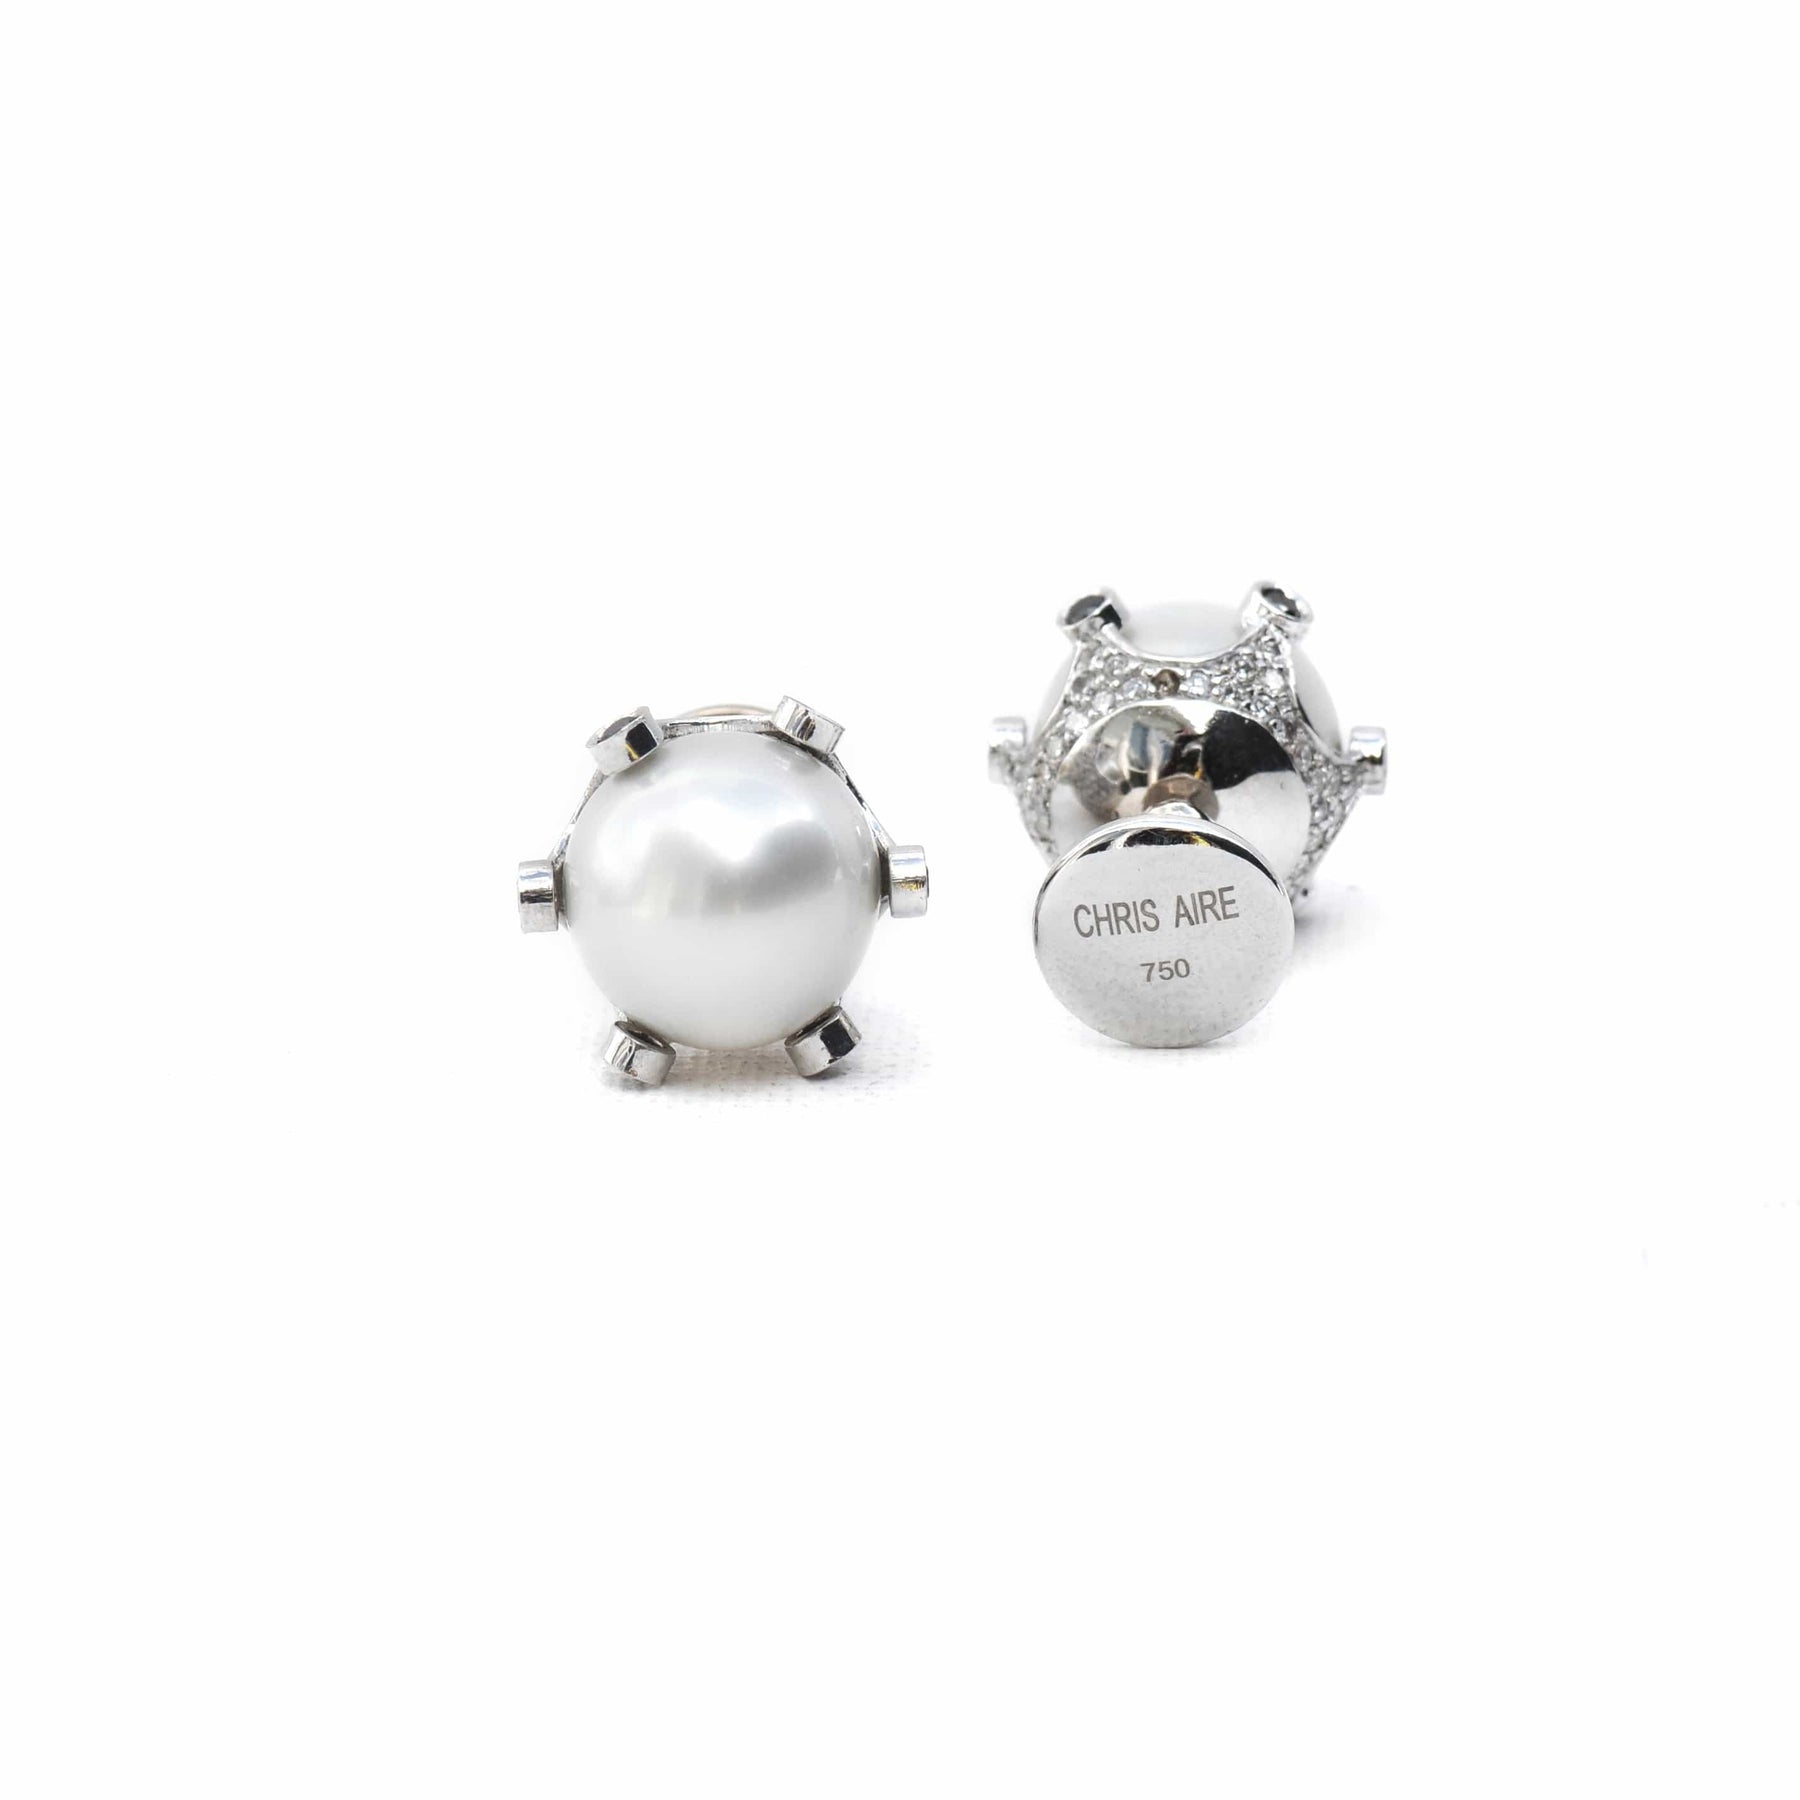 CHRIS AIRE CUFFLINKS - Chris Aire Fine Jewelry & Timepieces